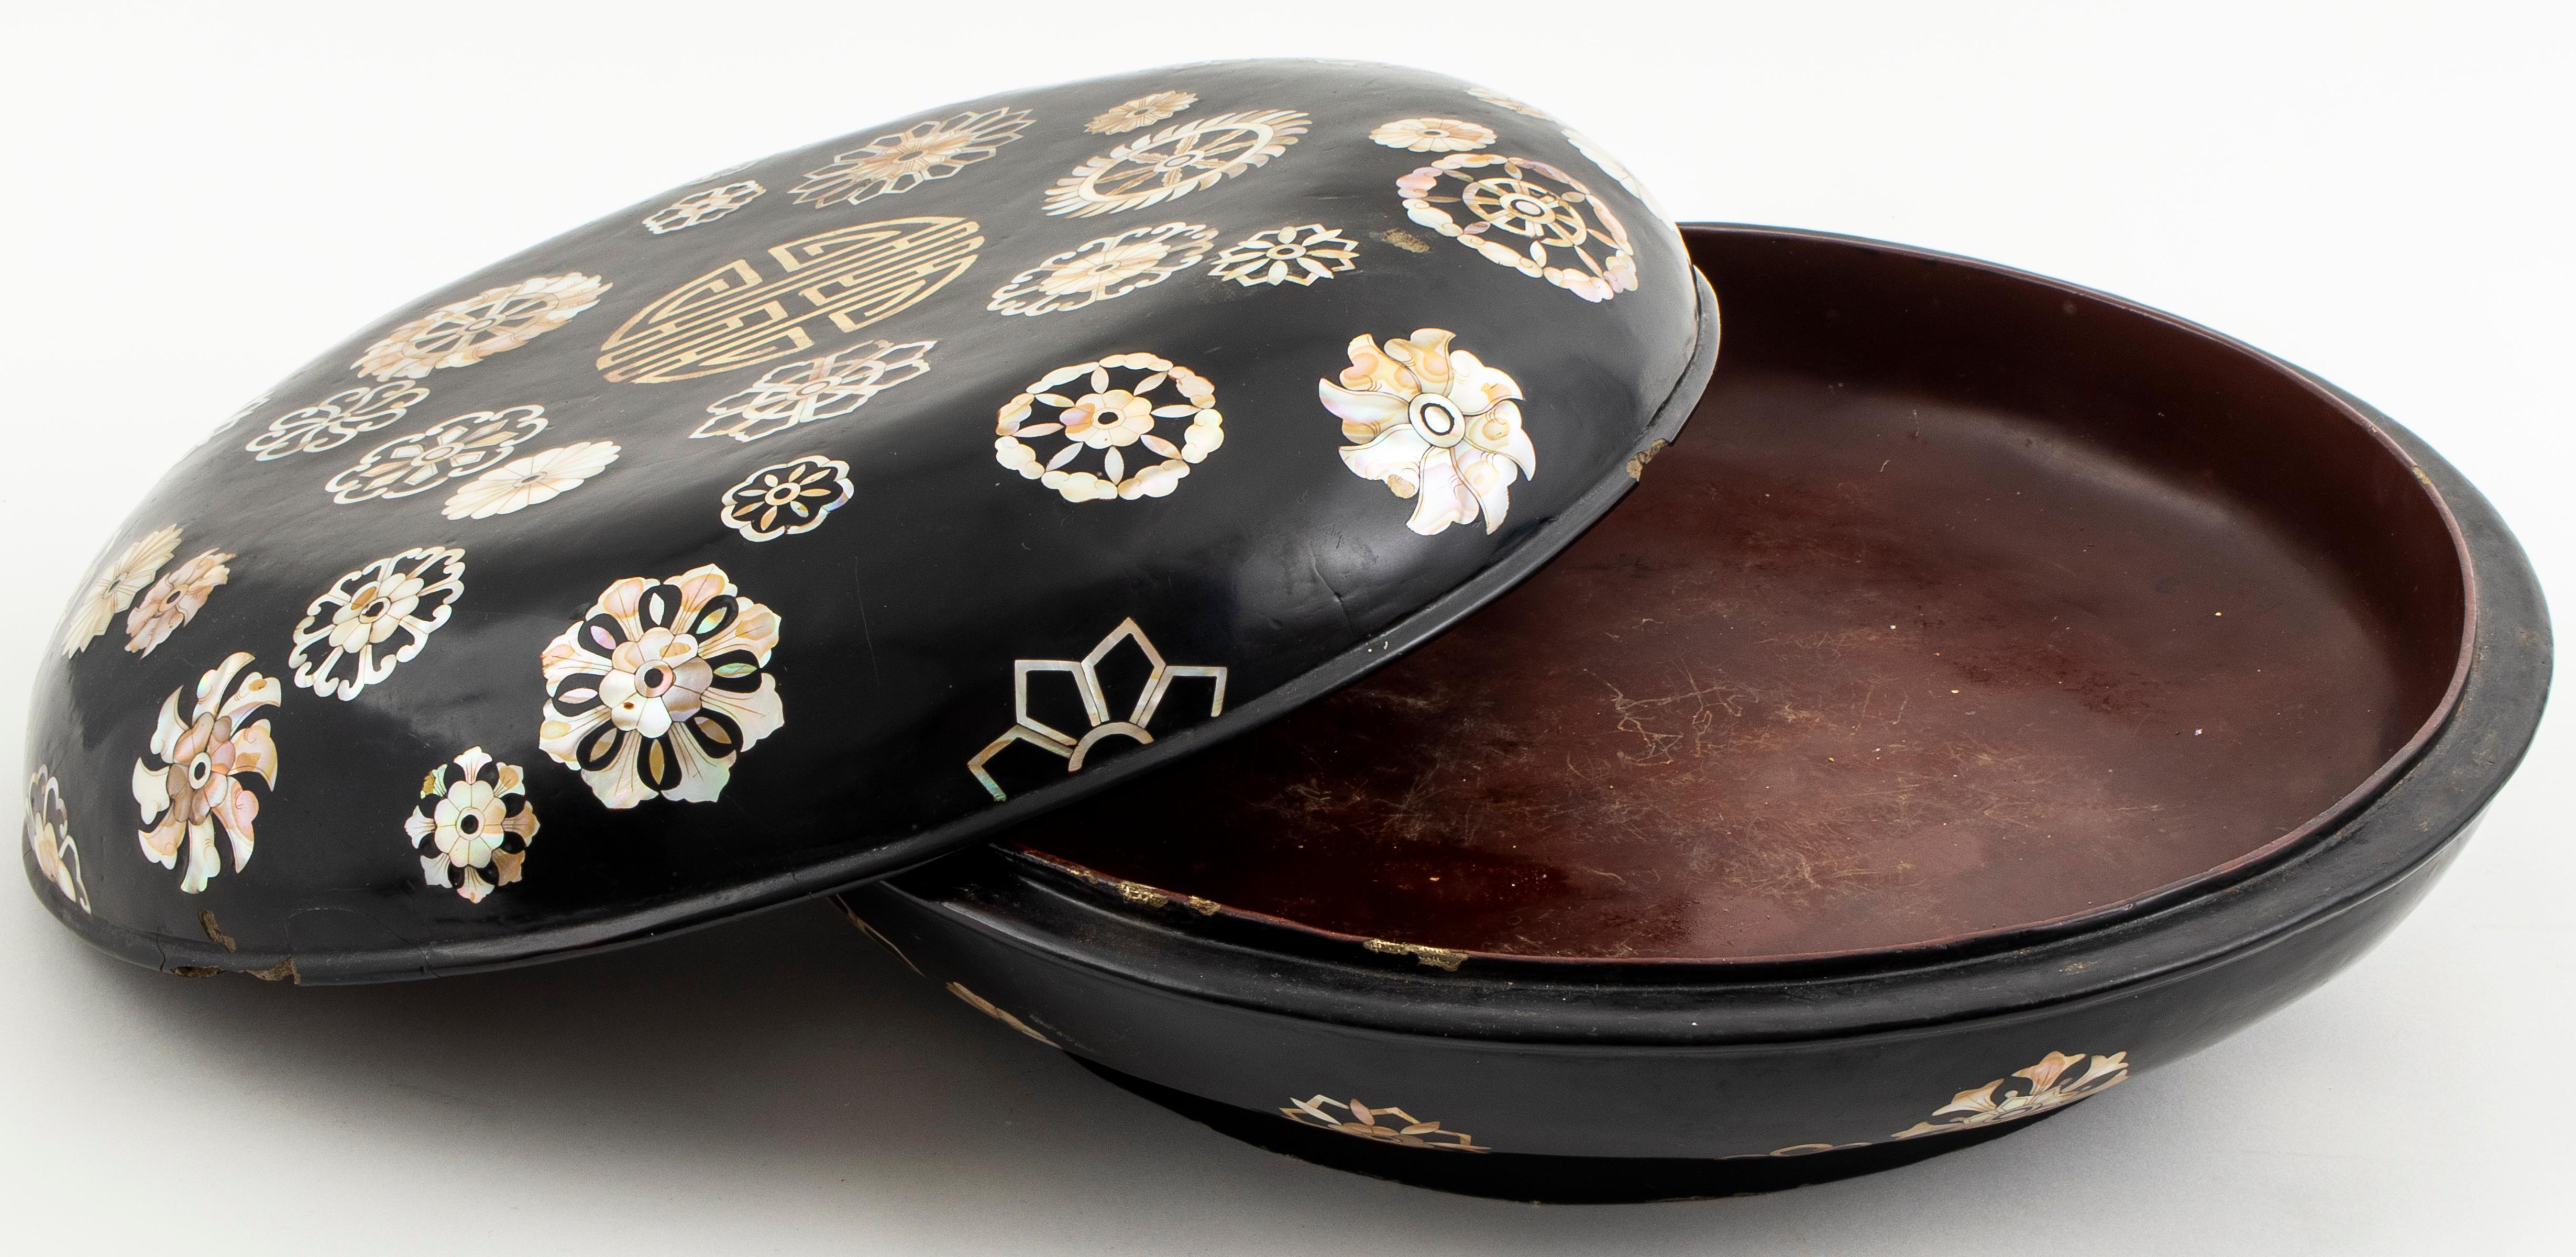 Korean shell inlaid hardwood covered bowl, overall with mother-of-pearl medallions and symbols. 5.75” H x 15.5” diameter. Removed from a private residence at the Pierre Hotel in New York City.